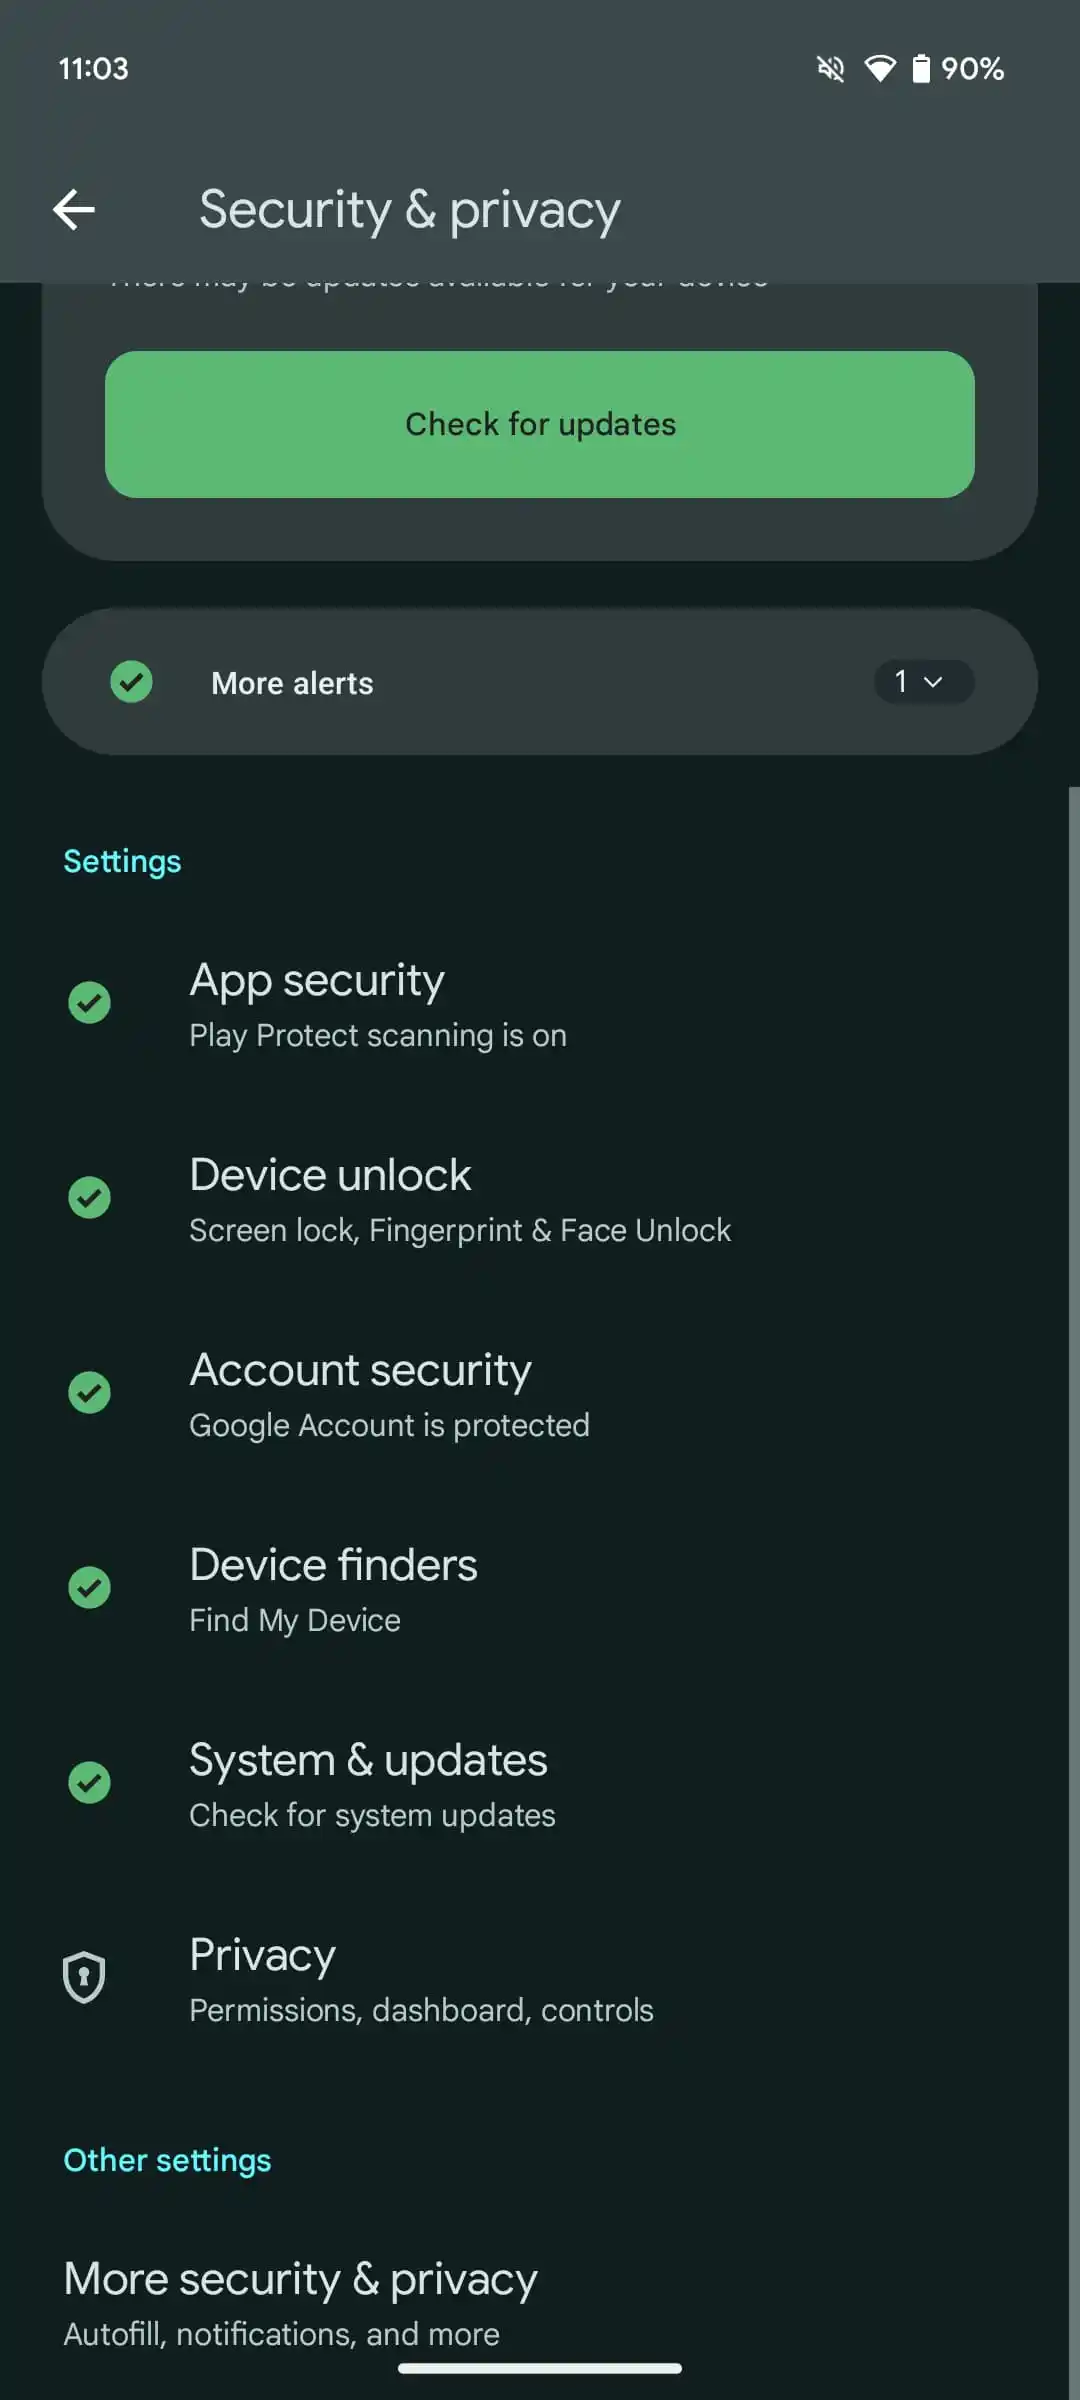 Introduces Private Space for enhanced app security and privacy